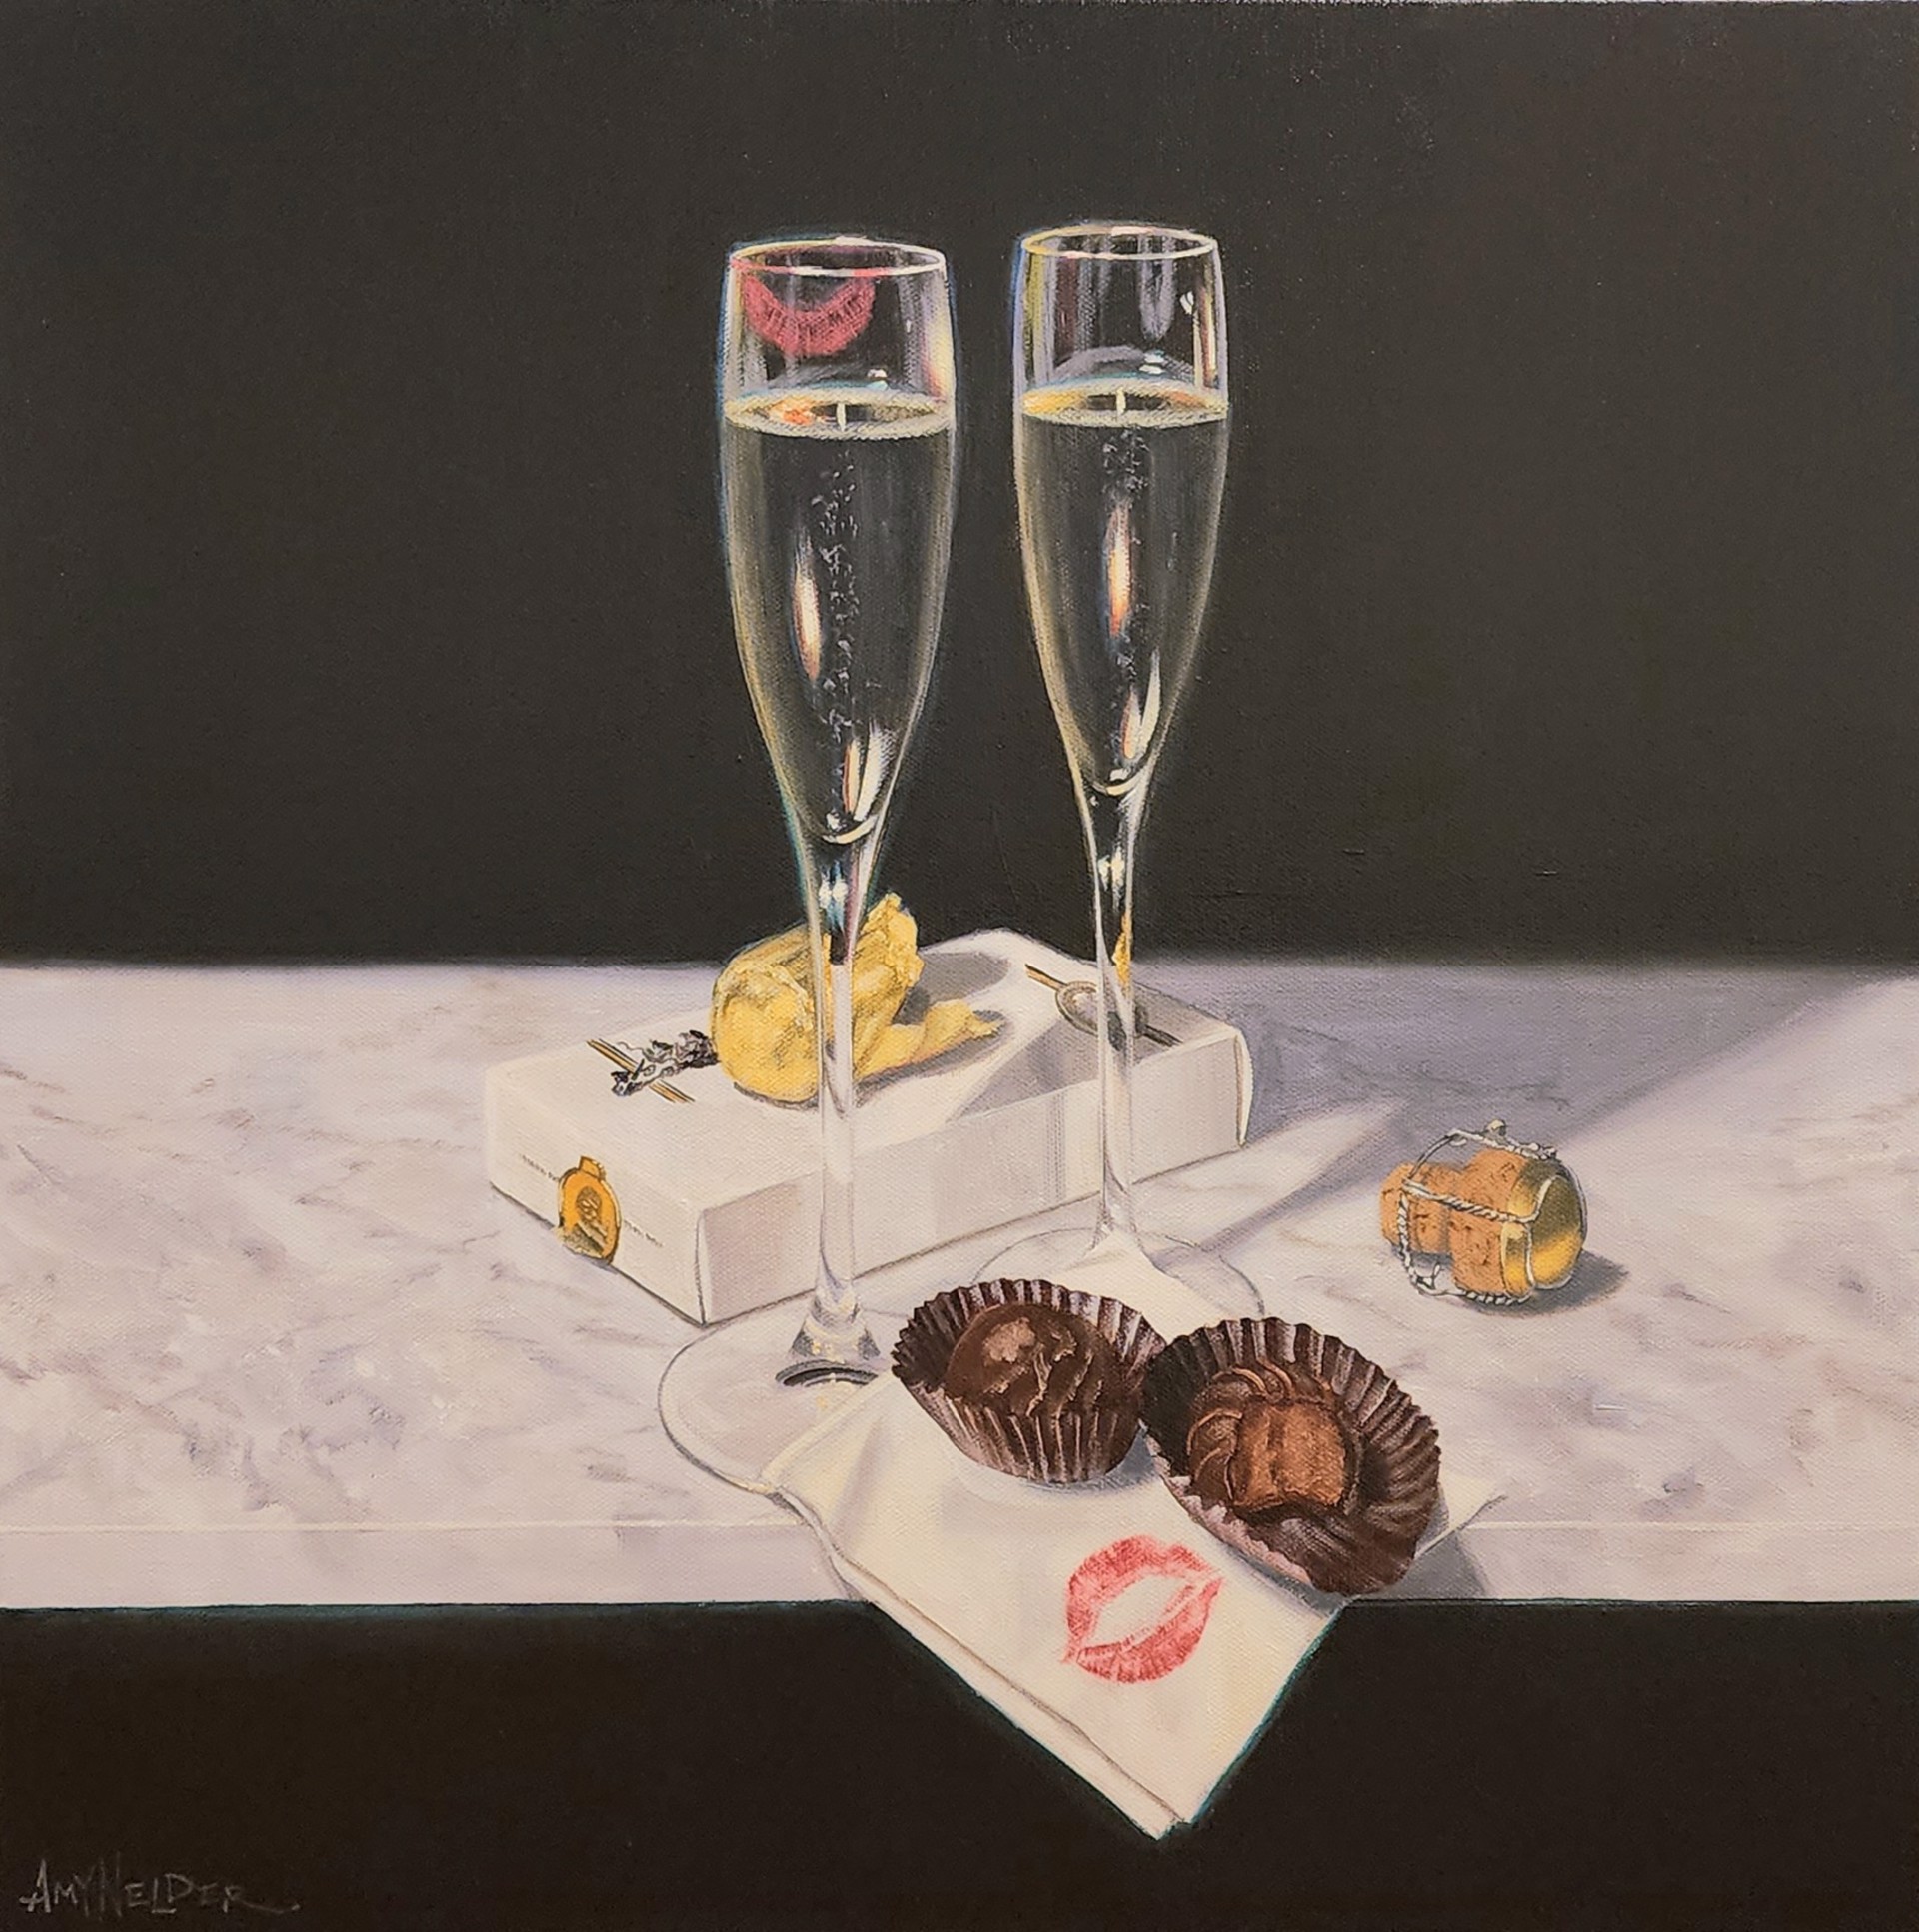 Bubbles and Bonbons by Amy Nelder